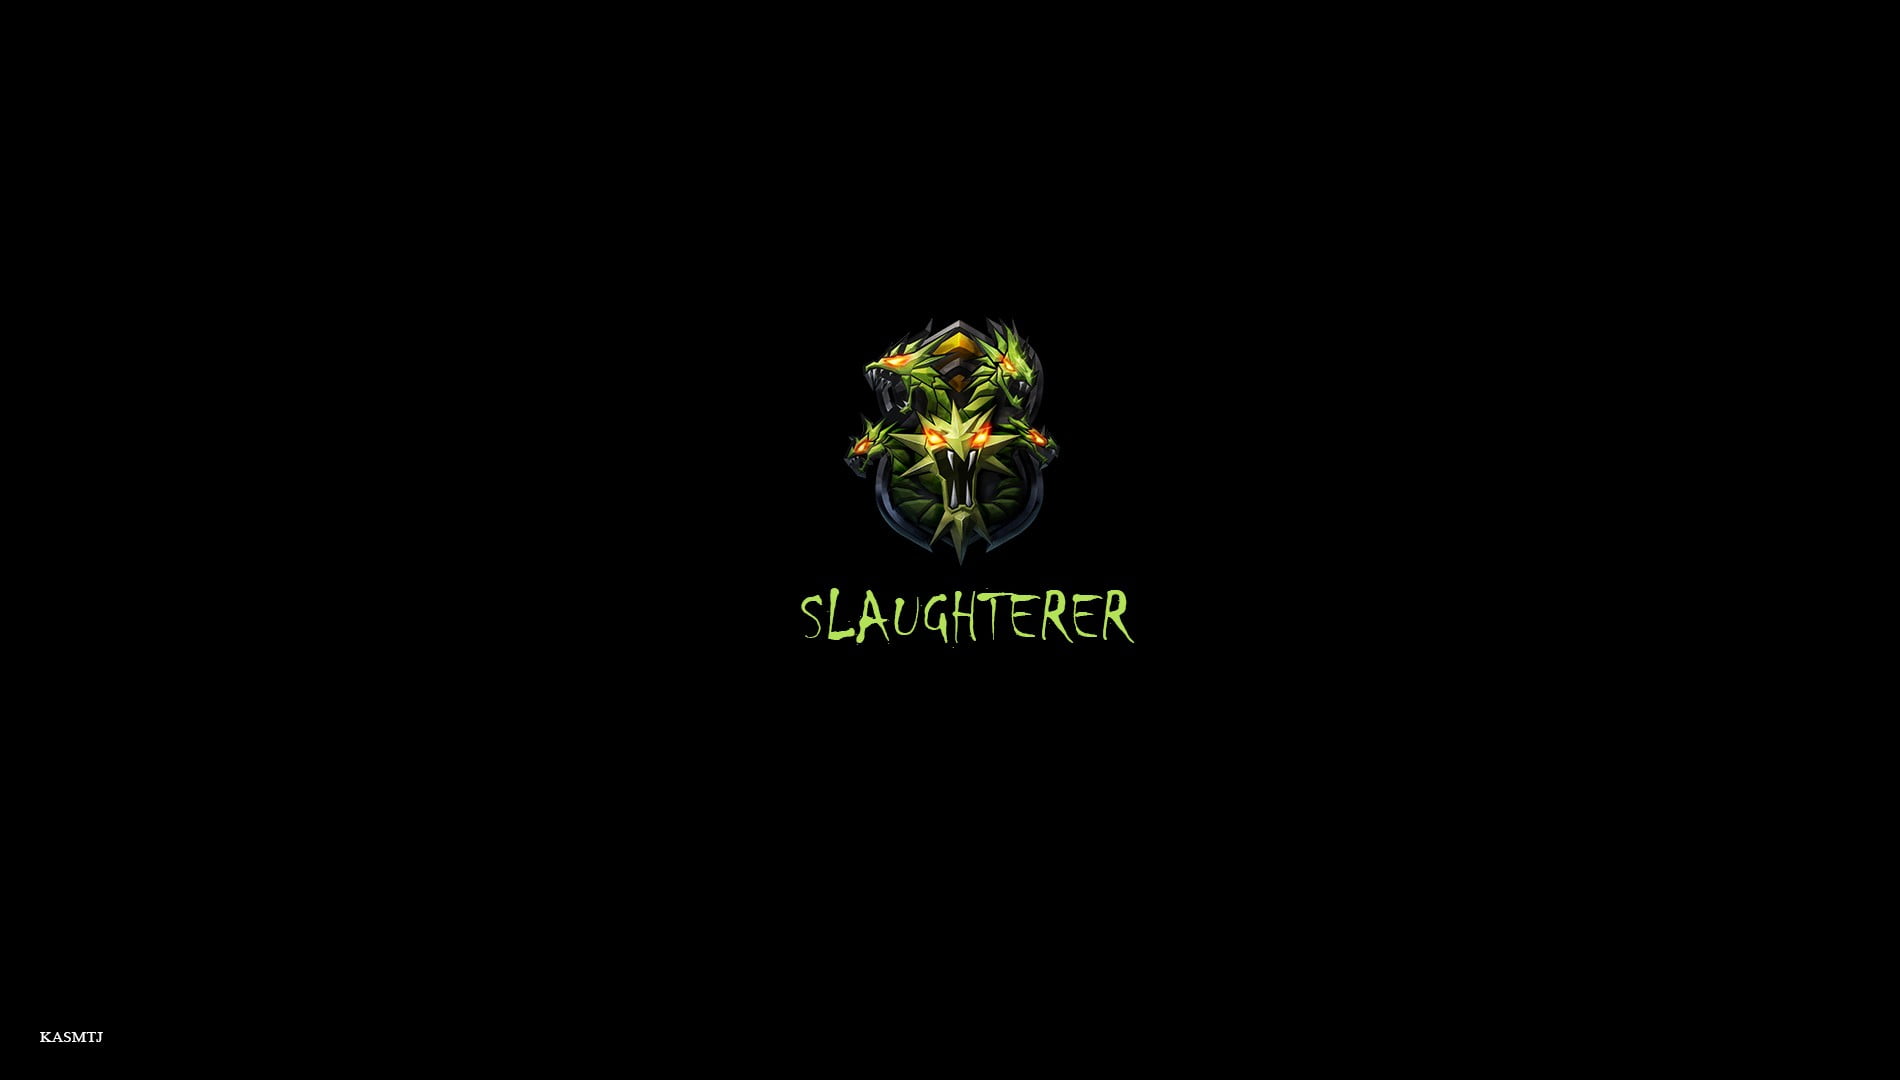 Slaughterer text, call of duty black ops, cod bo 3, simple, logo